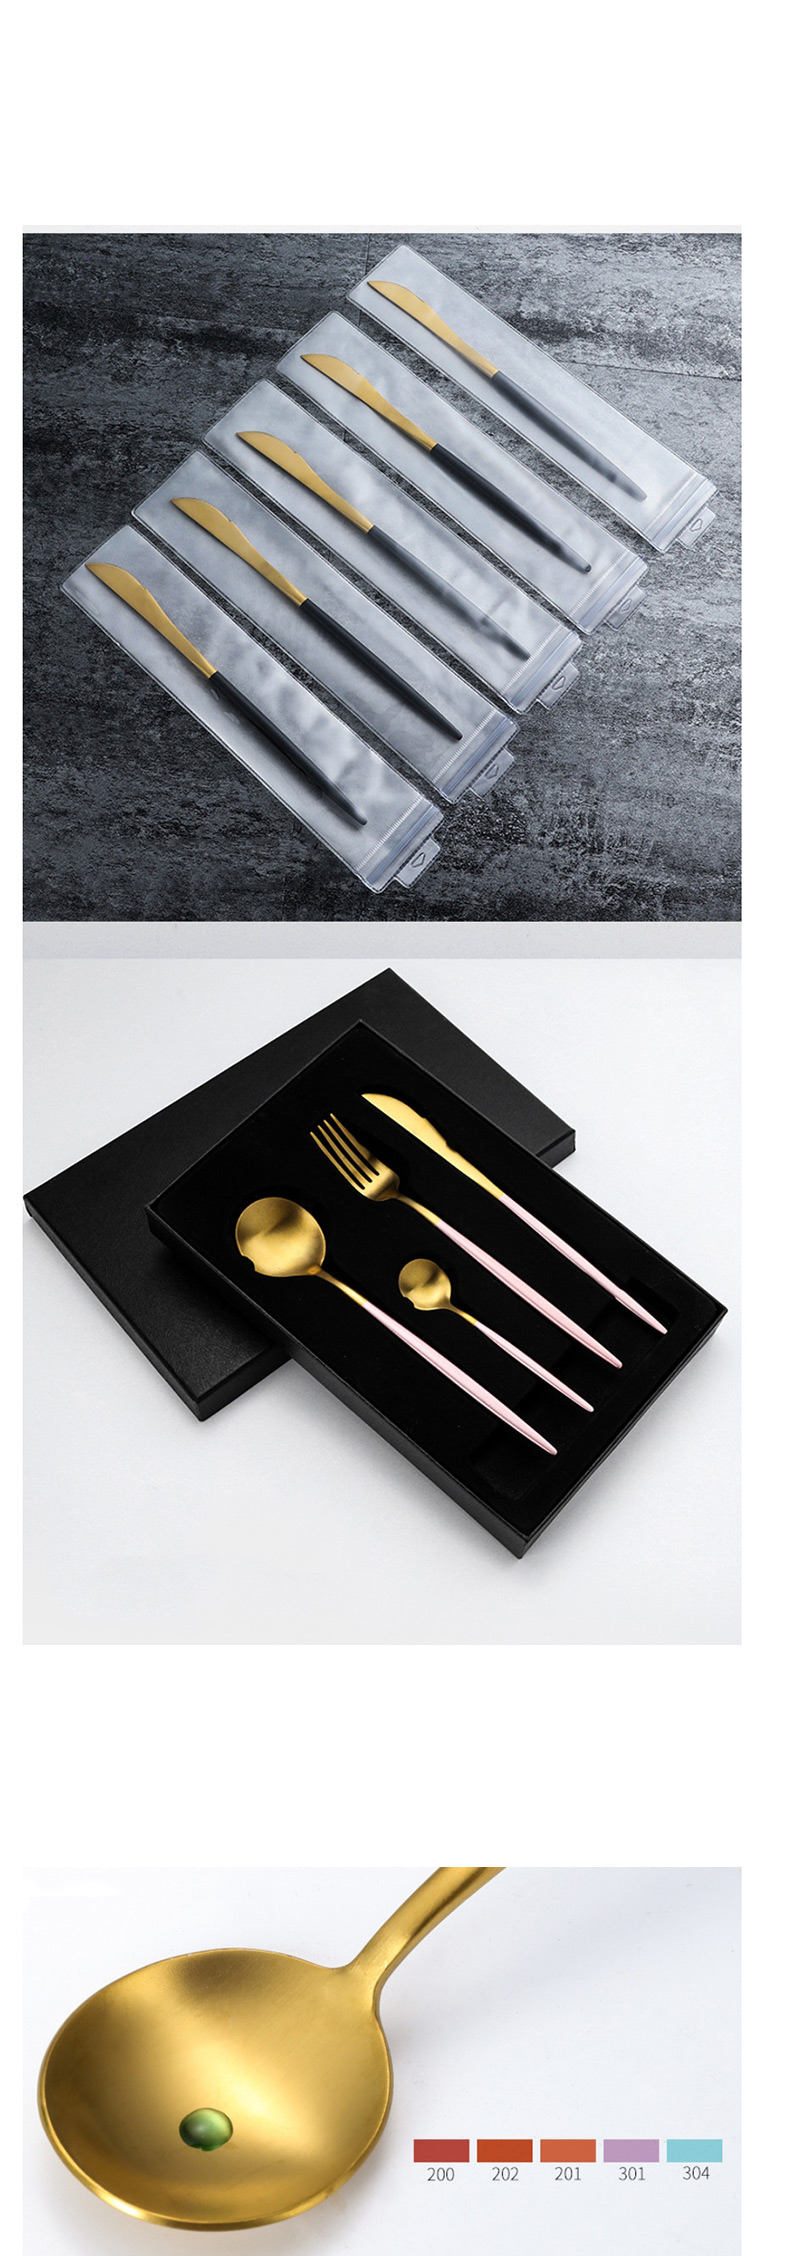 Fashion Rose Gold 4 Piece Set (cutlery Spoon + Chopsticks) 304 Stainless Steel Cutlery Cutlery Set,Household goods